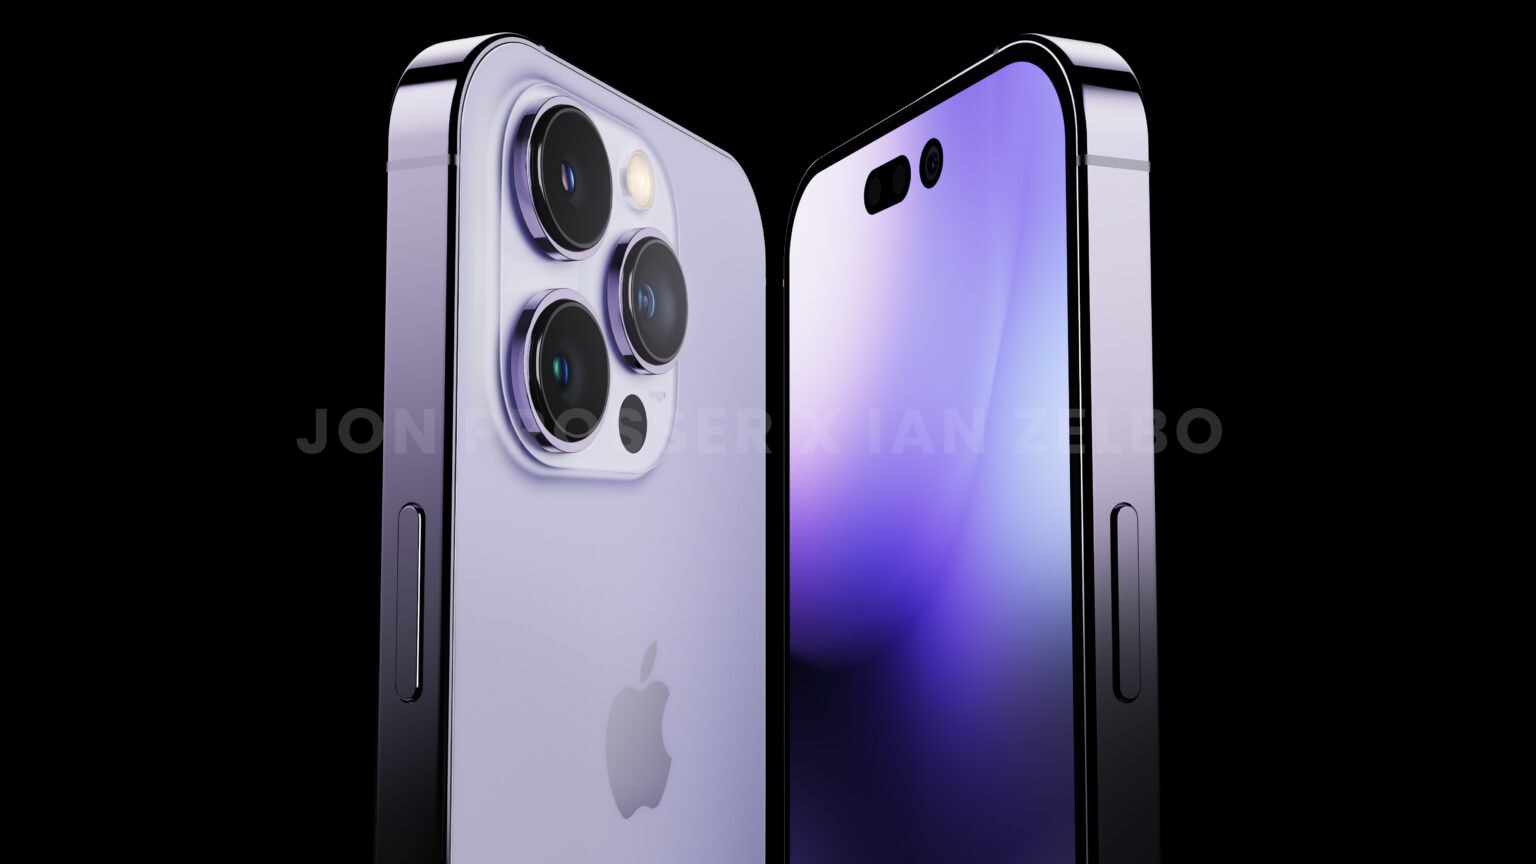 New renders show iPhone 14 in all its purported purple glory